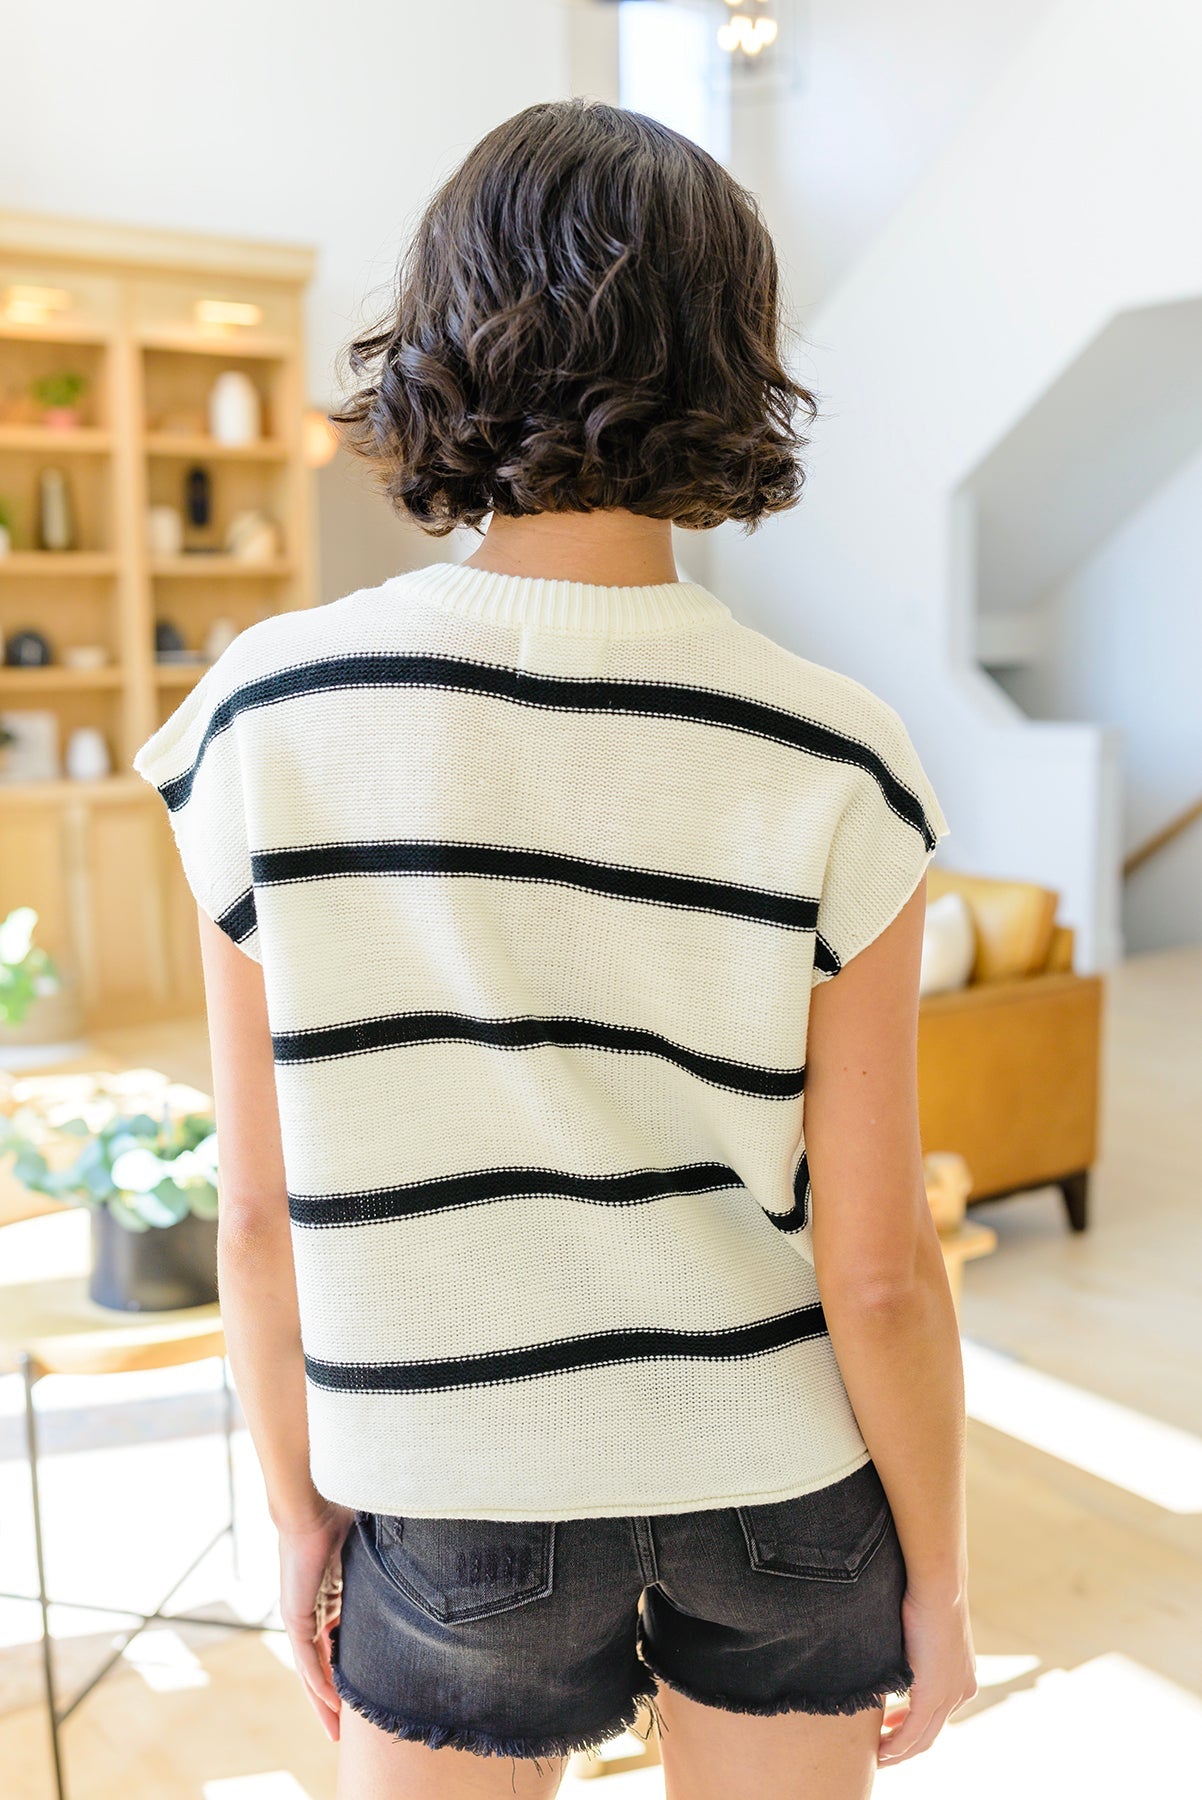 More or Less Striped Sleeveless Sweater (Ships in 1-2 Weeks)